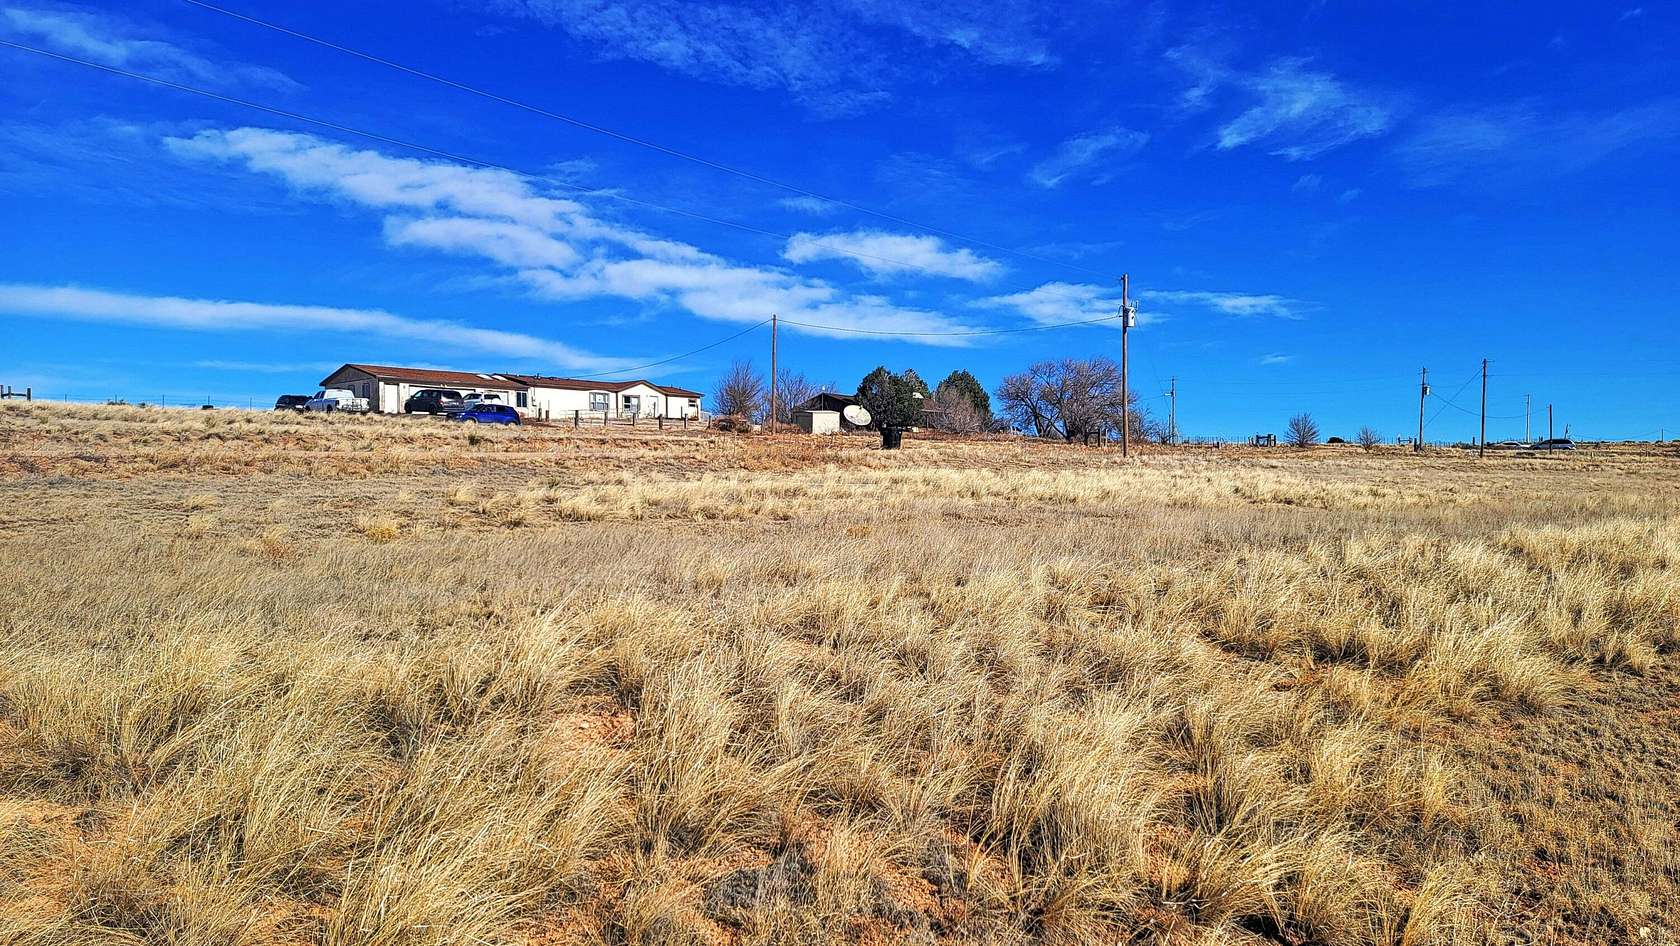 10 Acres of Residential Land for Sale in Moriarty, New Mexico